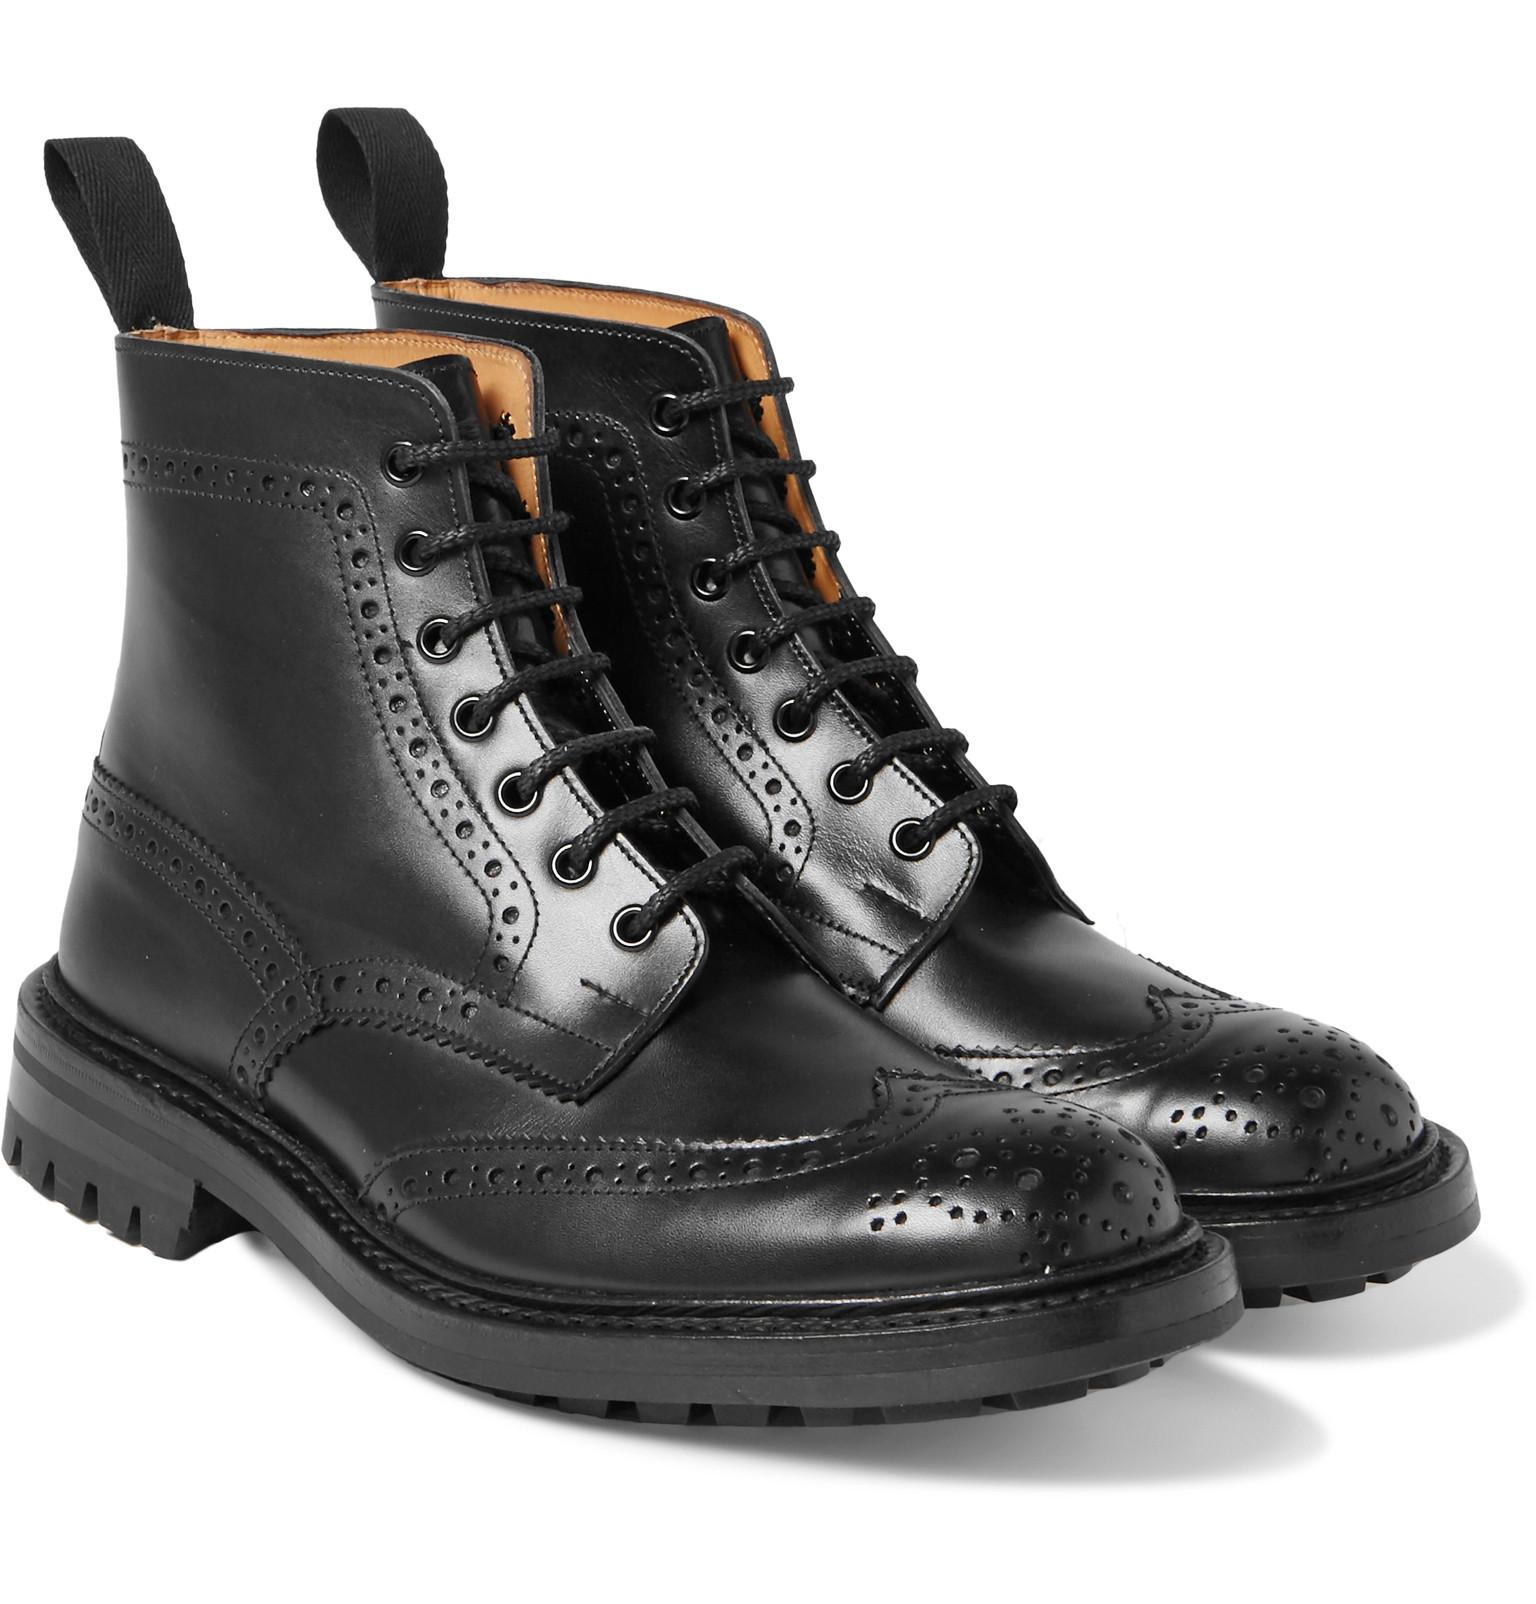 Lyst - Tricker's Stow Leather Brogue Boots for Men